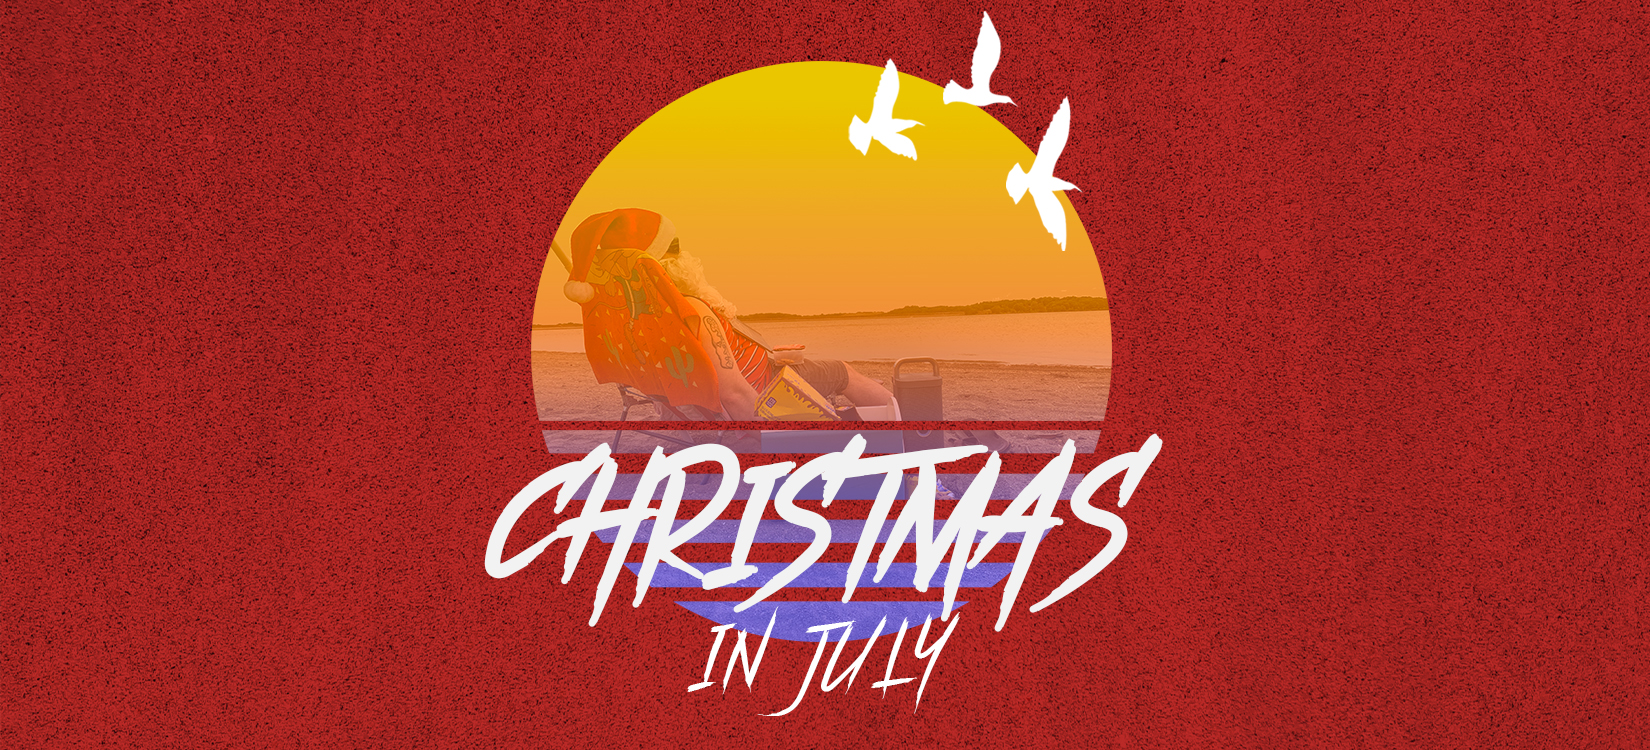 Christmas_in_July graphic